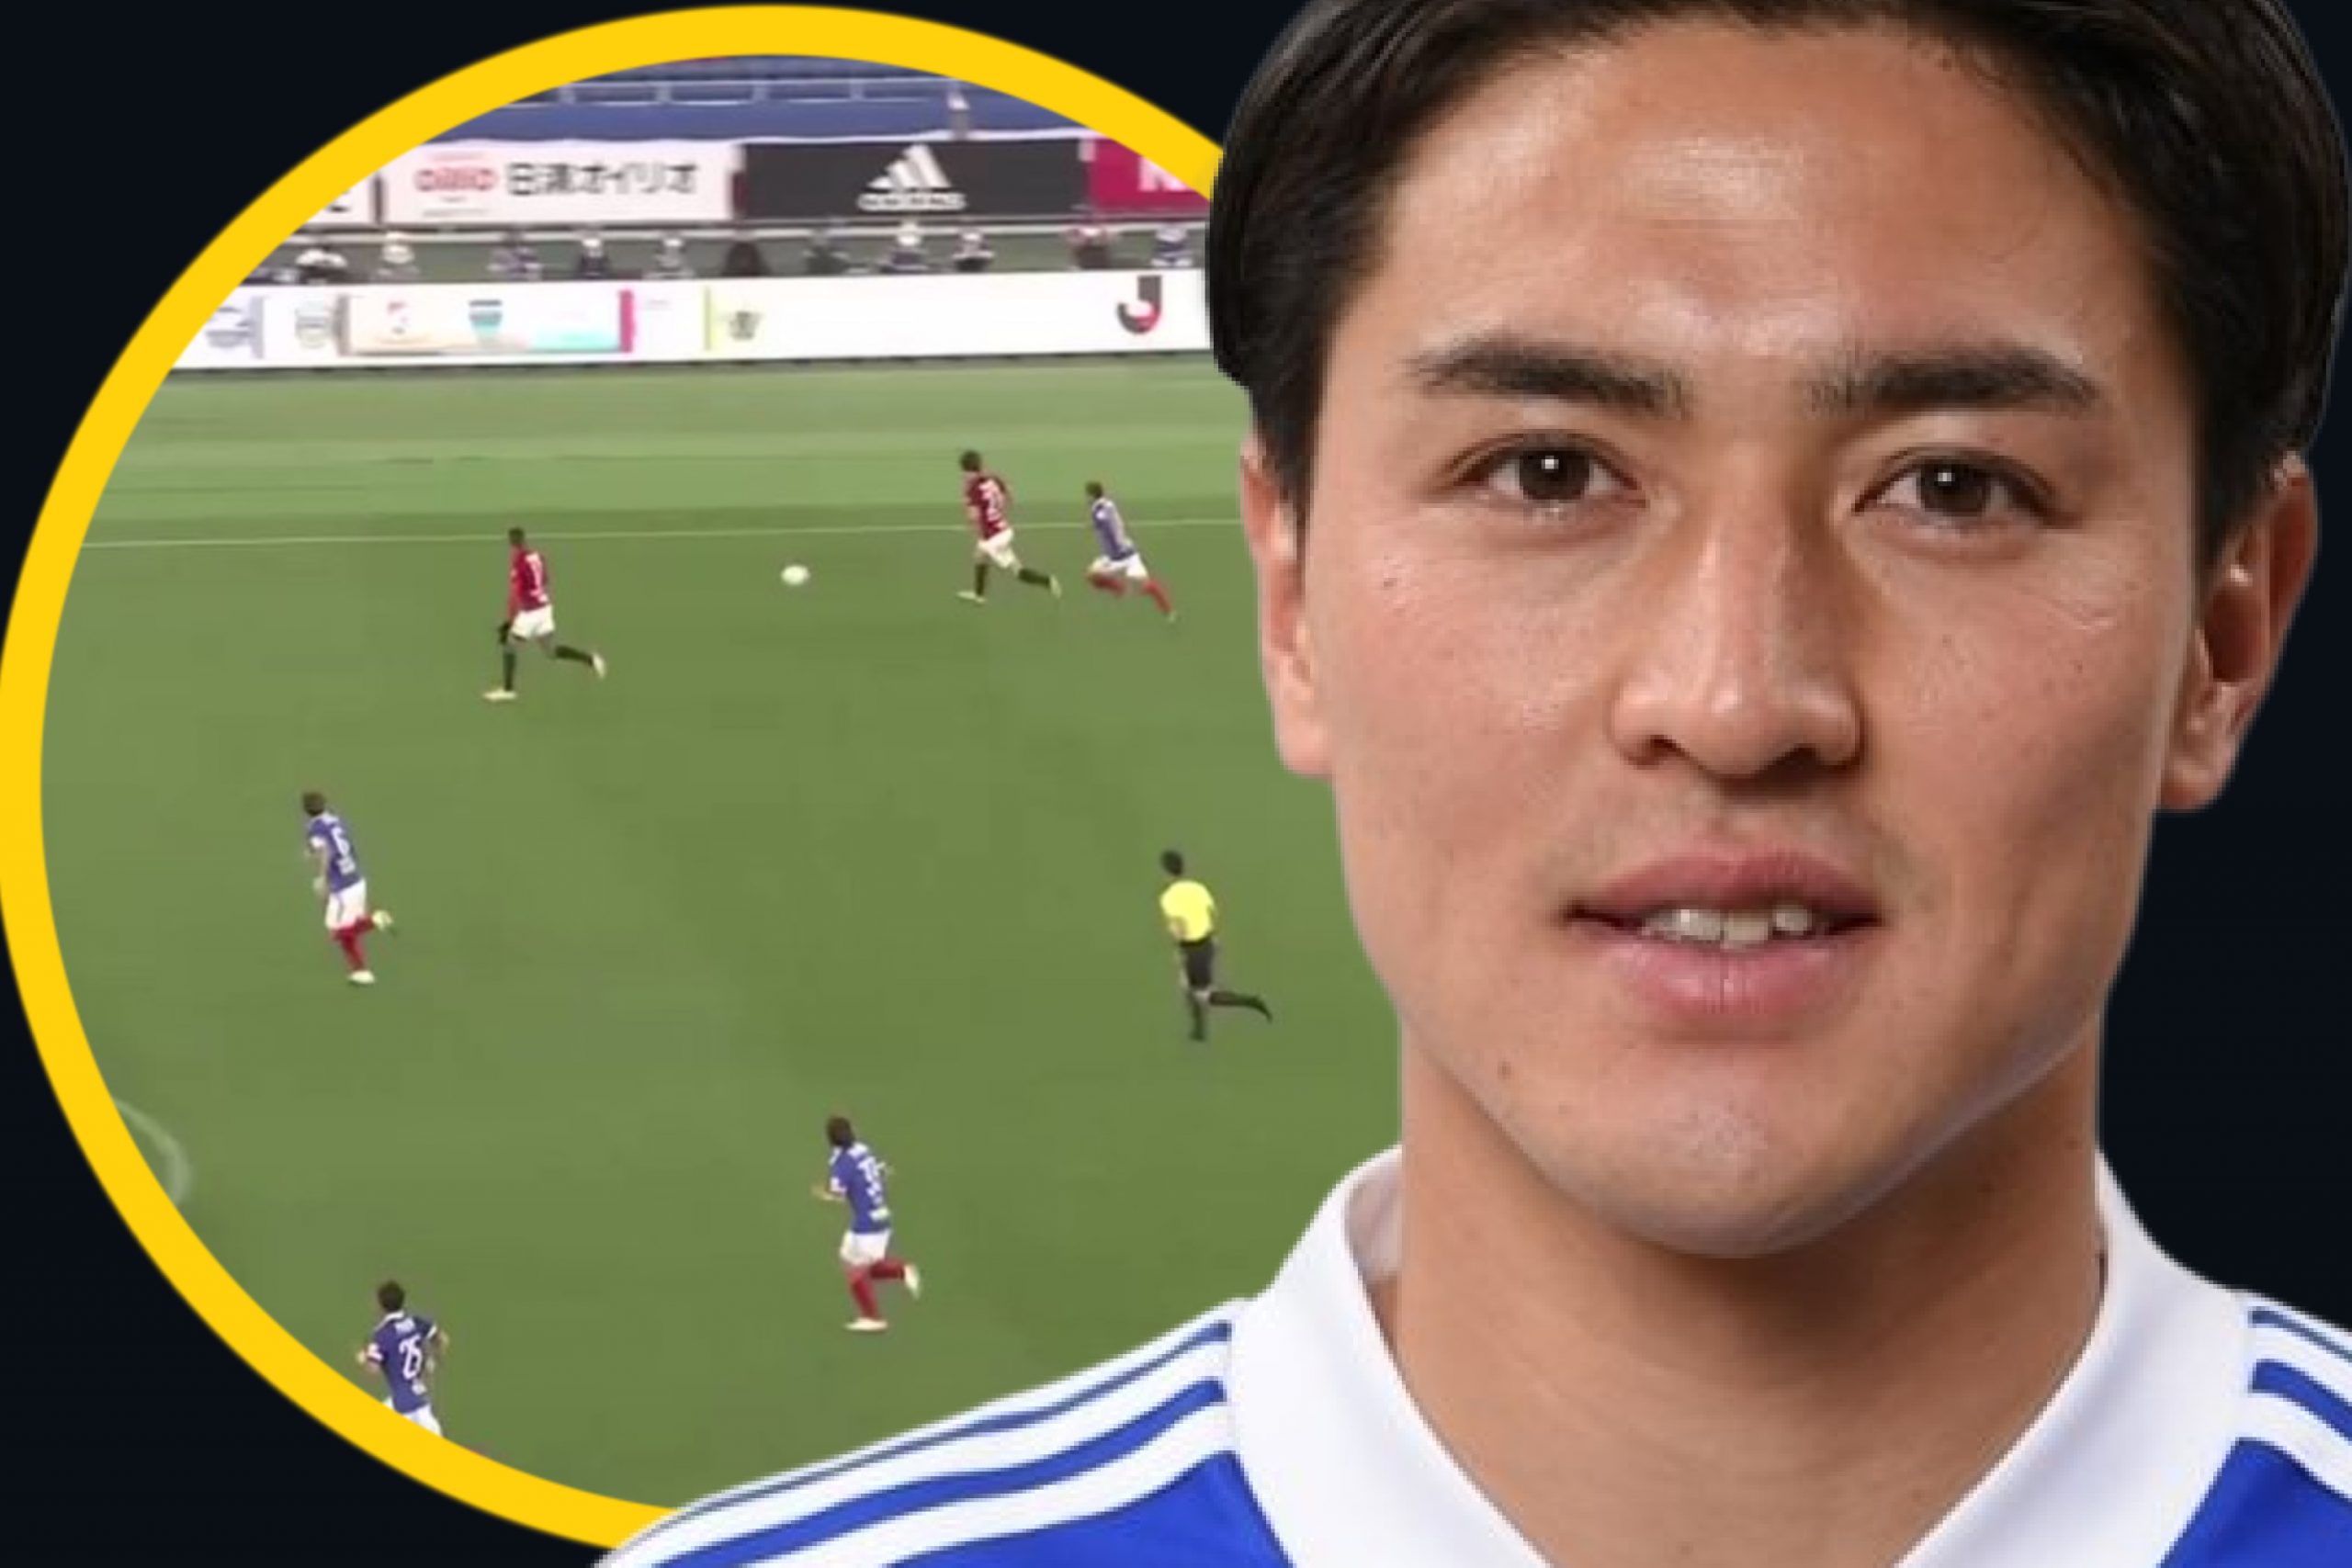 Makito Ito scores own goal from 30 yards in J-League clash against Urawa Reds